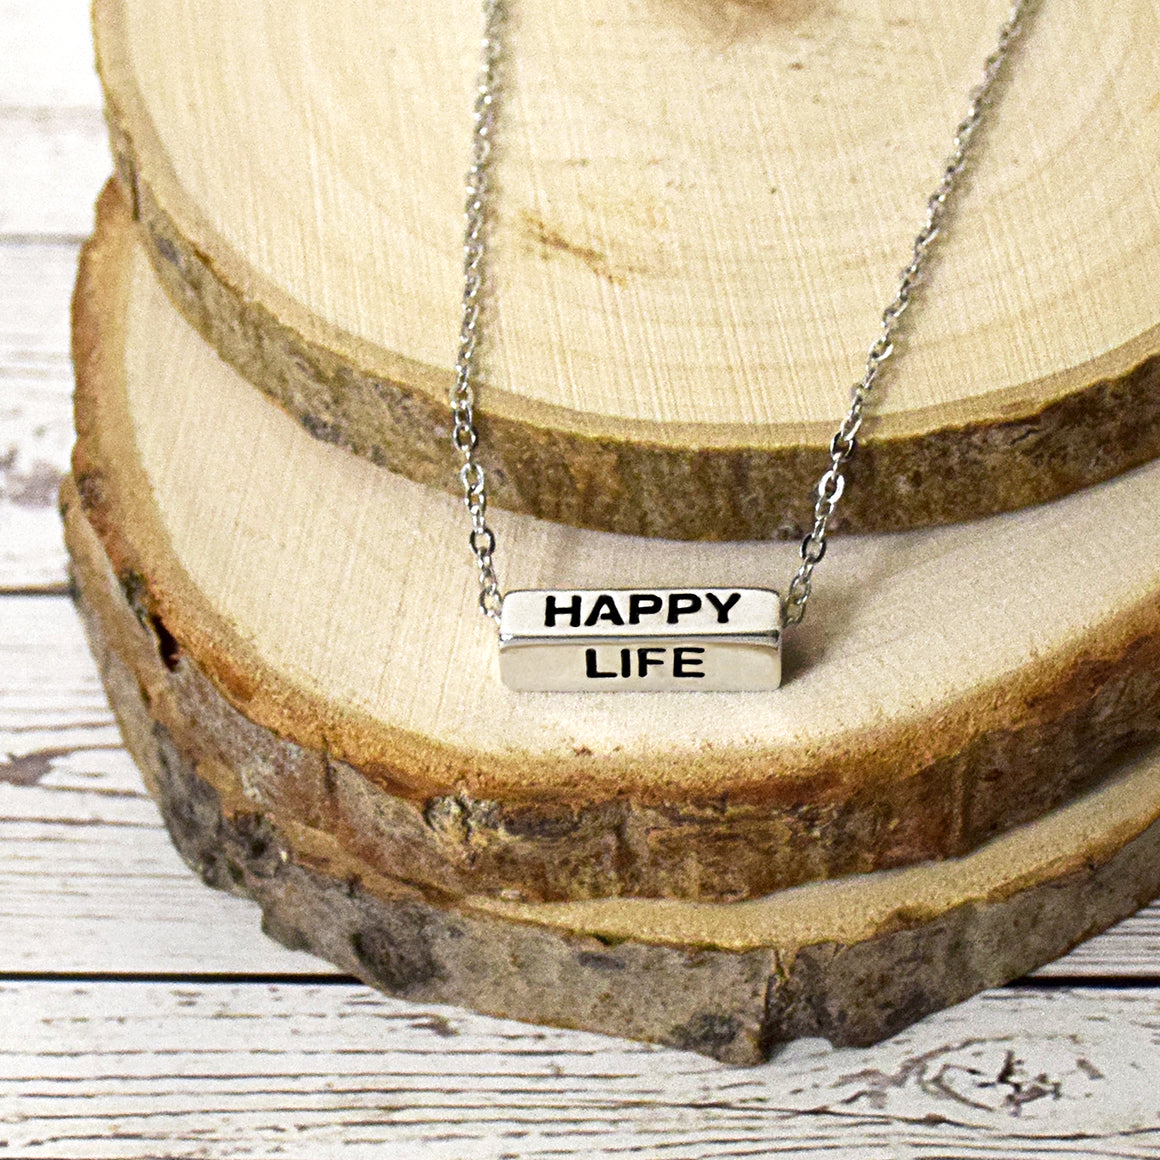 Happy Life Necklace - Silver Finish Bar Necklace